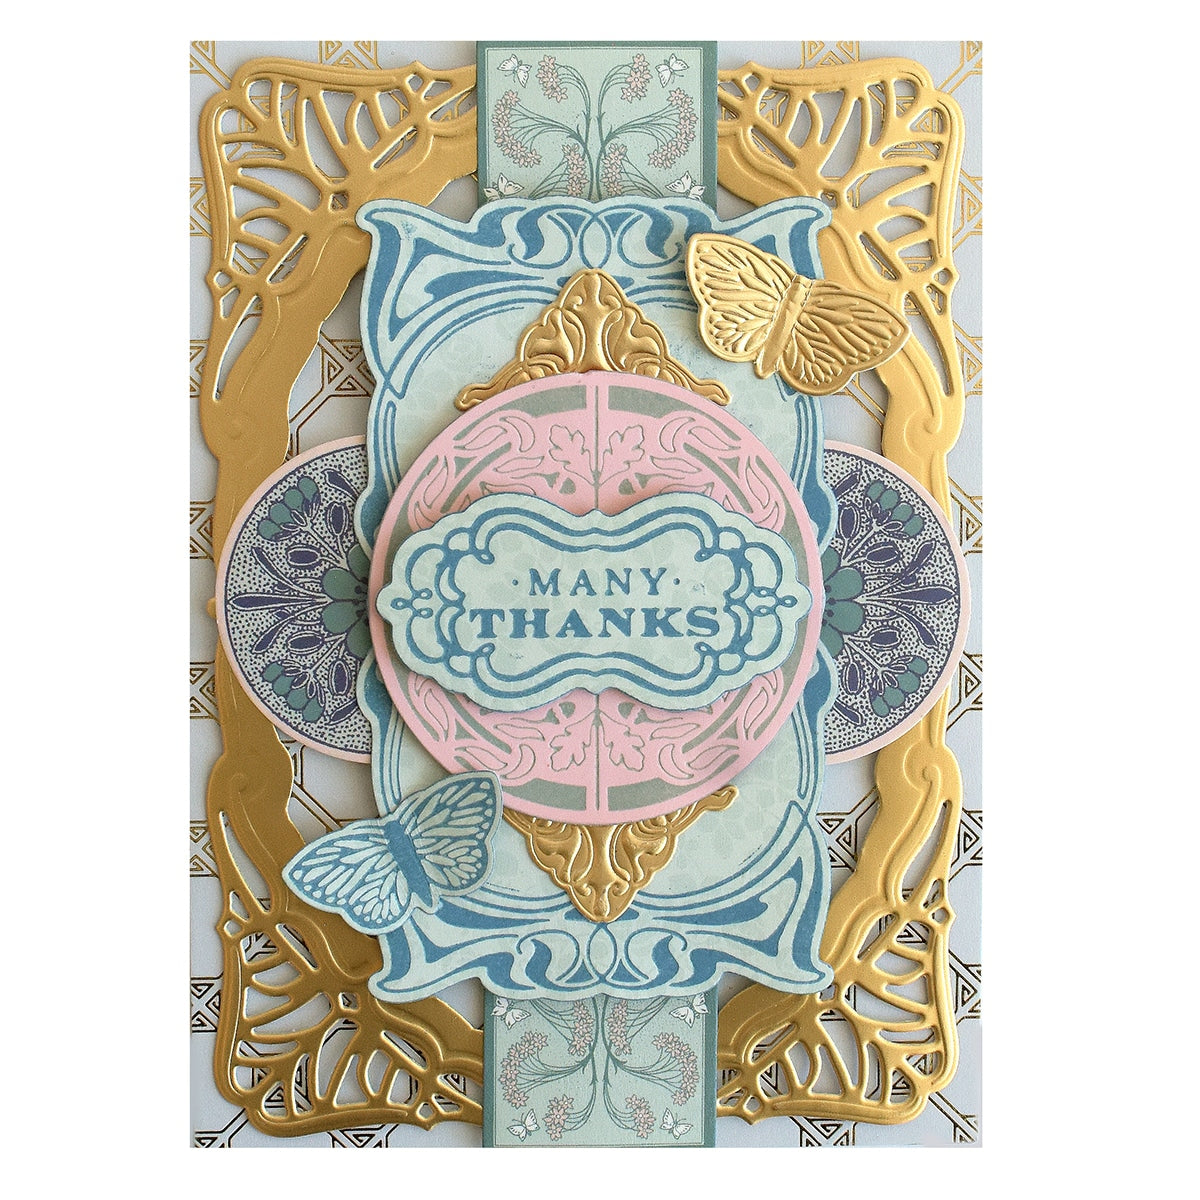 a card with a thank message on it.